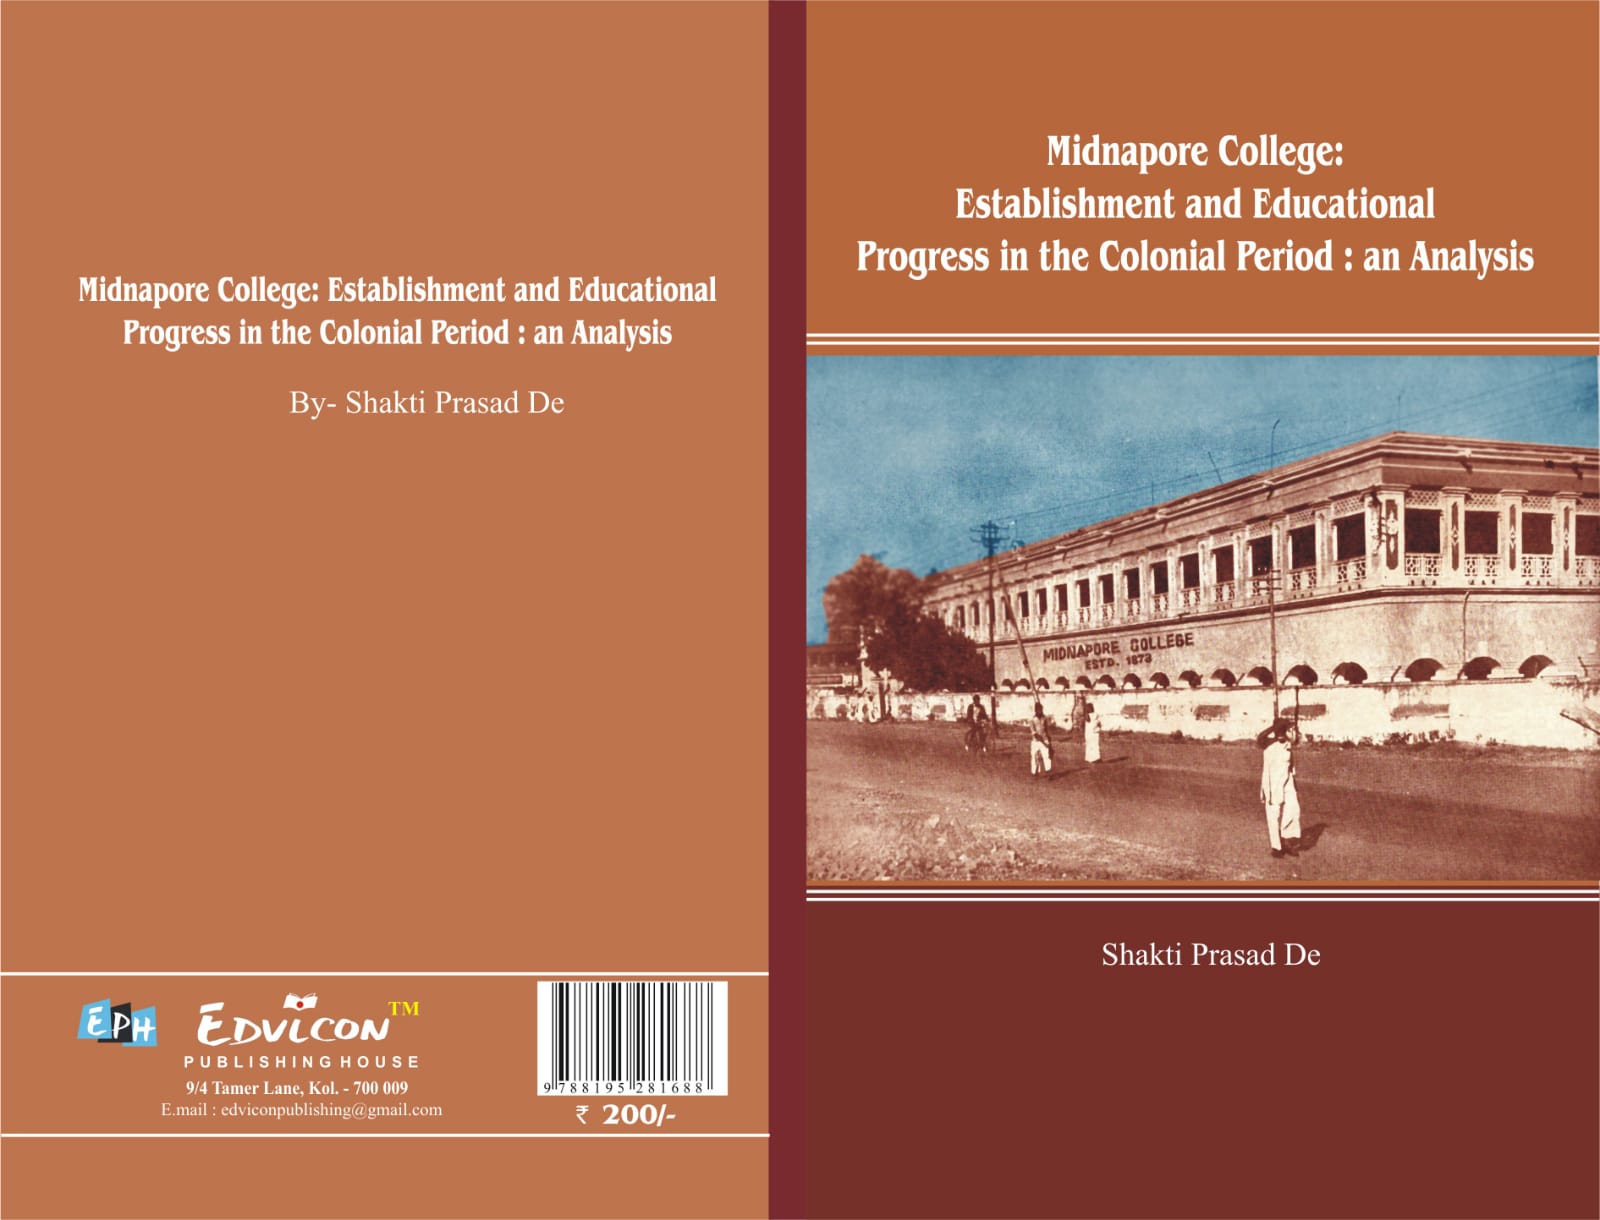 MIDNAPORE COLLEGE ESTABLISHMENT AND EDUCATIONAL PROGRESS IN THE COLONIAL PERIOD :AN ALALYSYS